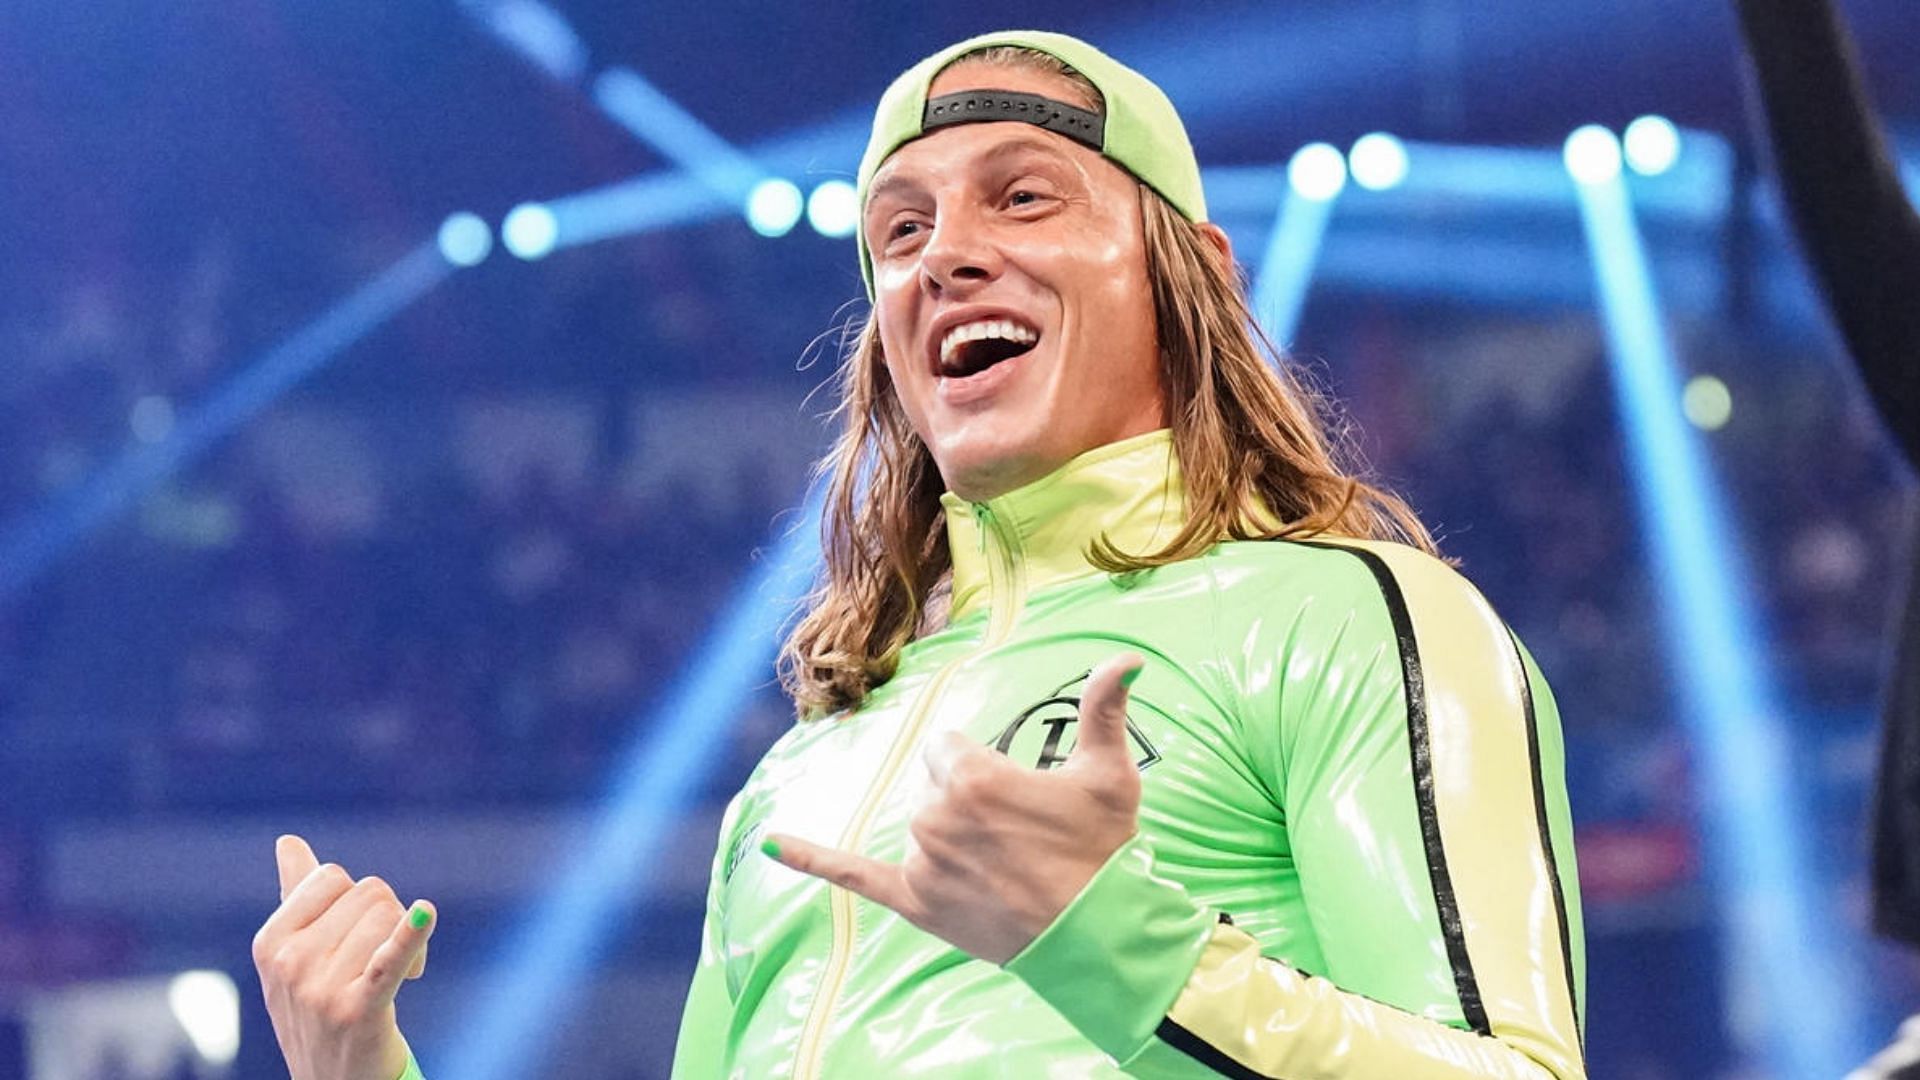 Matt Riddle is a former United States Champion!